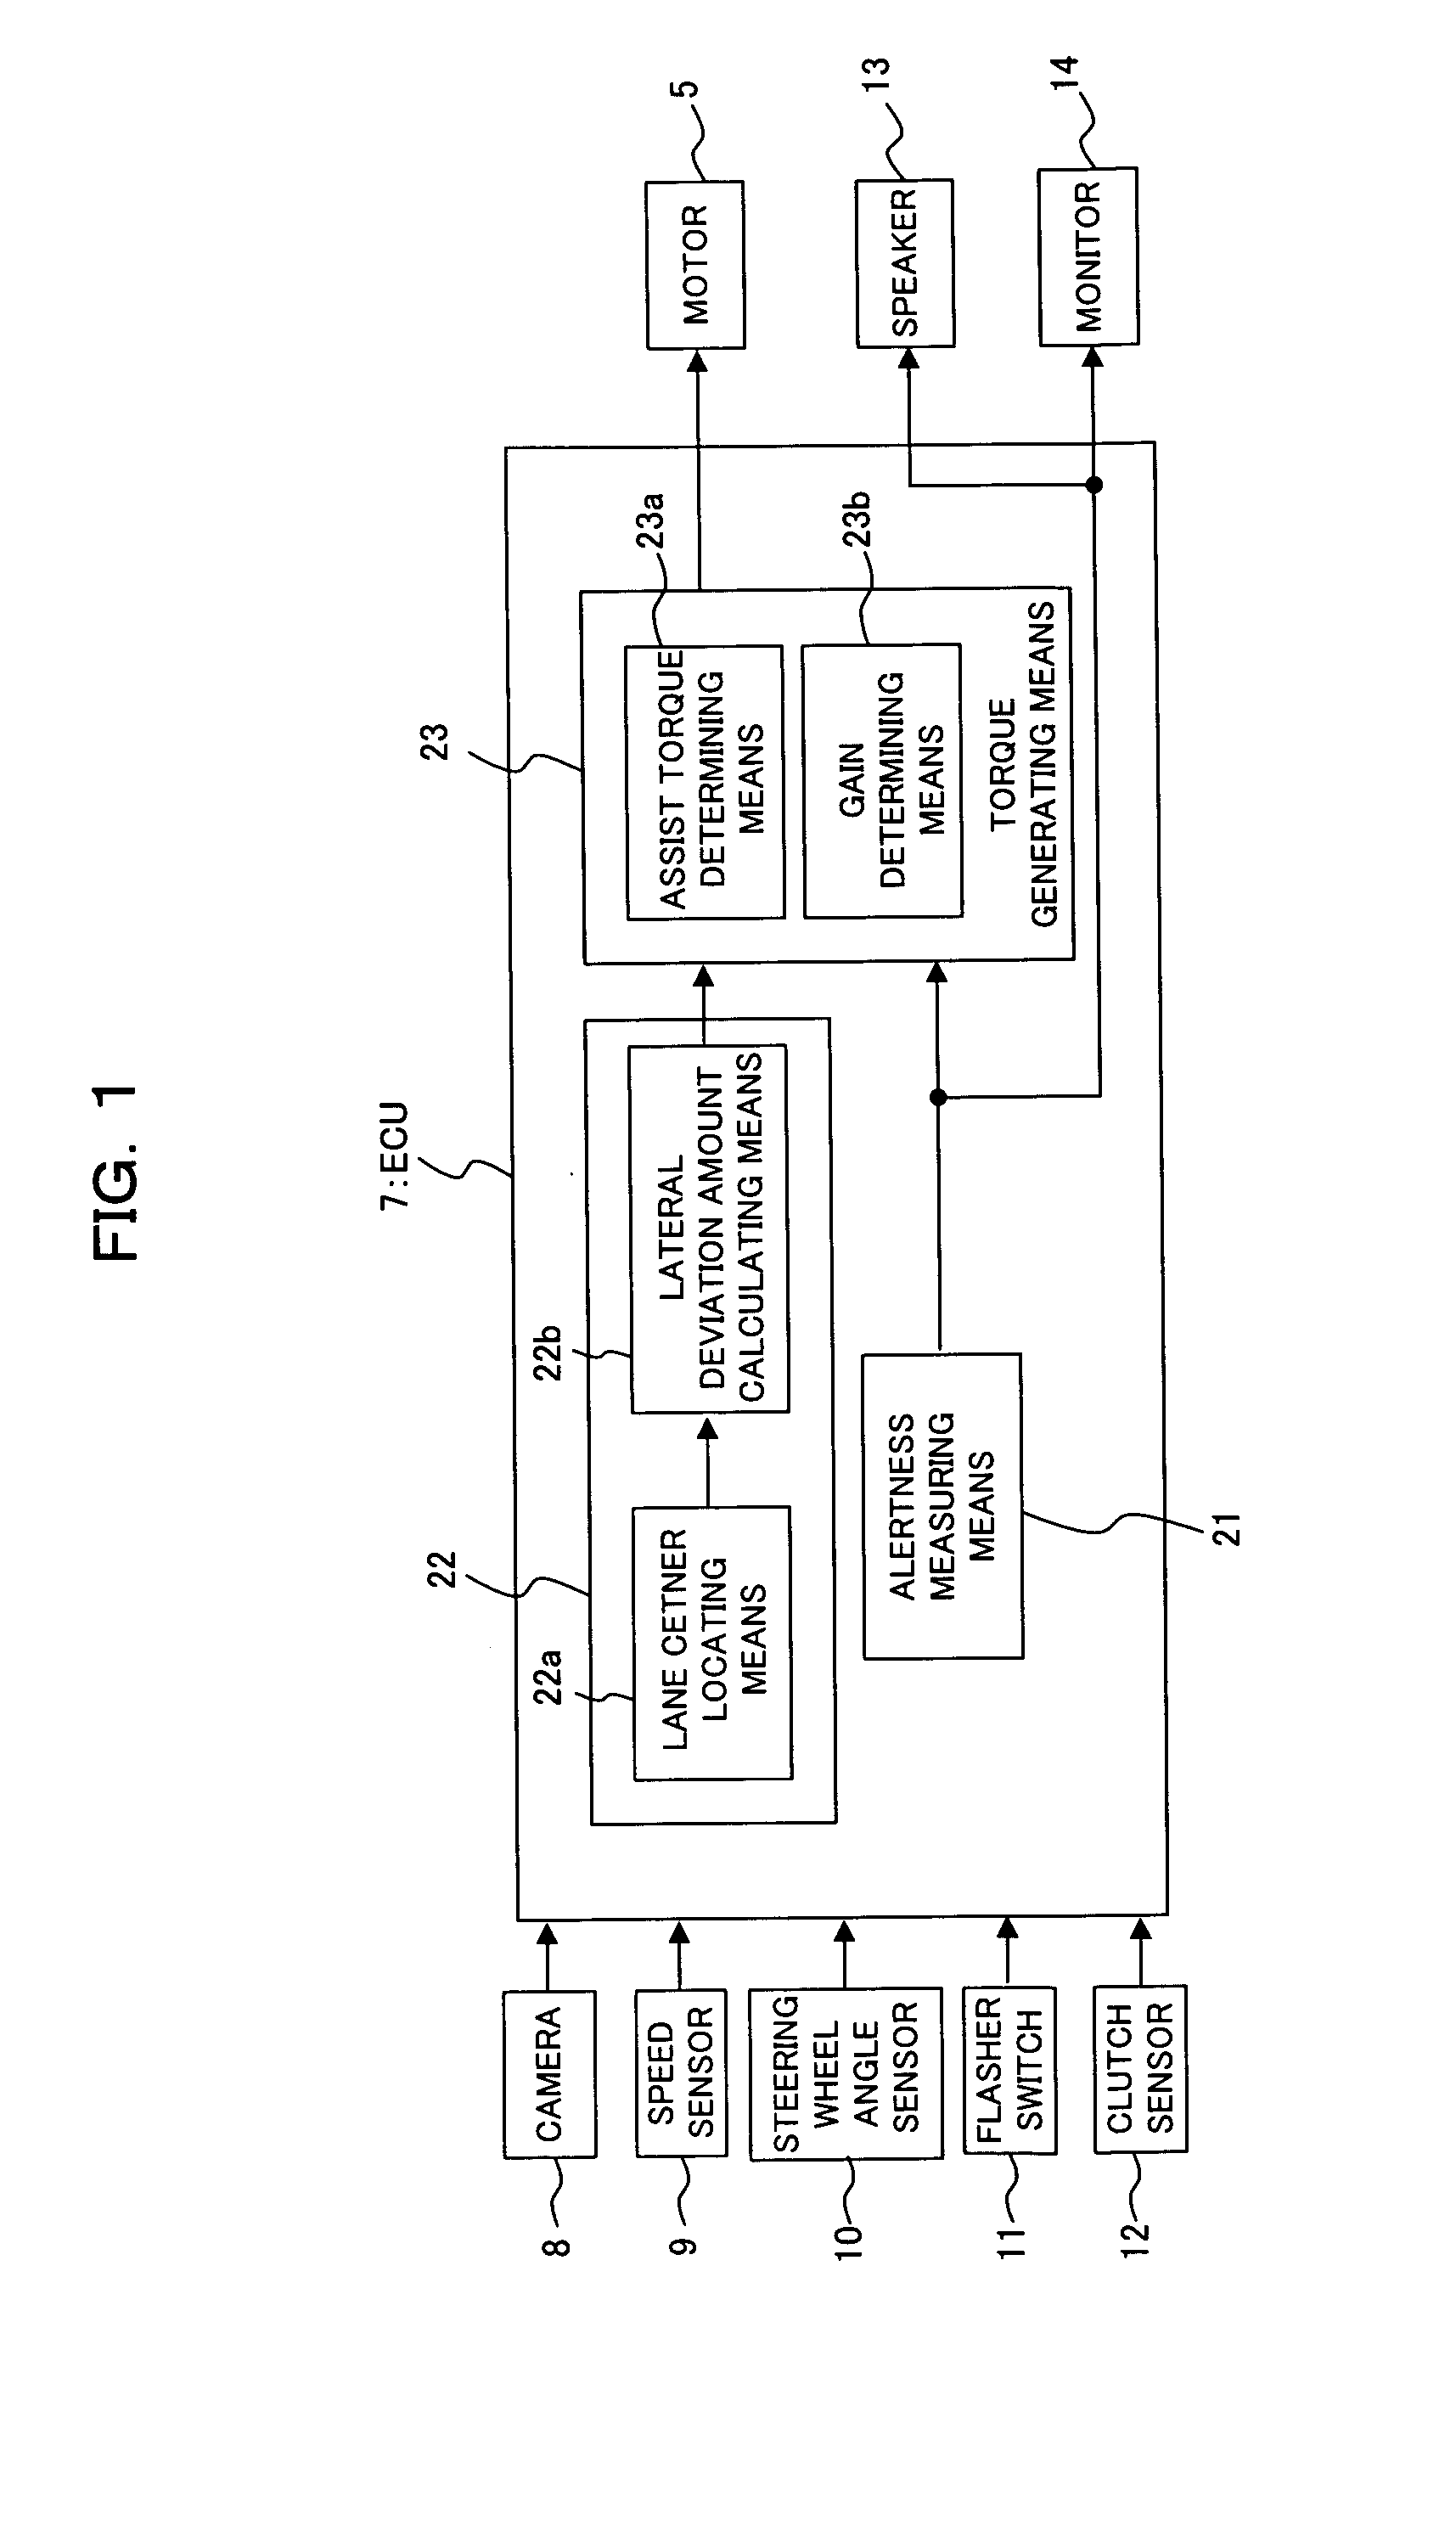 Lane keeping assistant apparatus